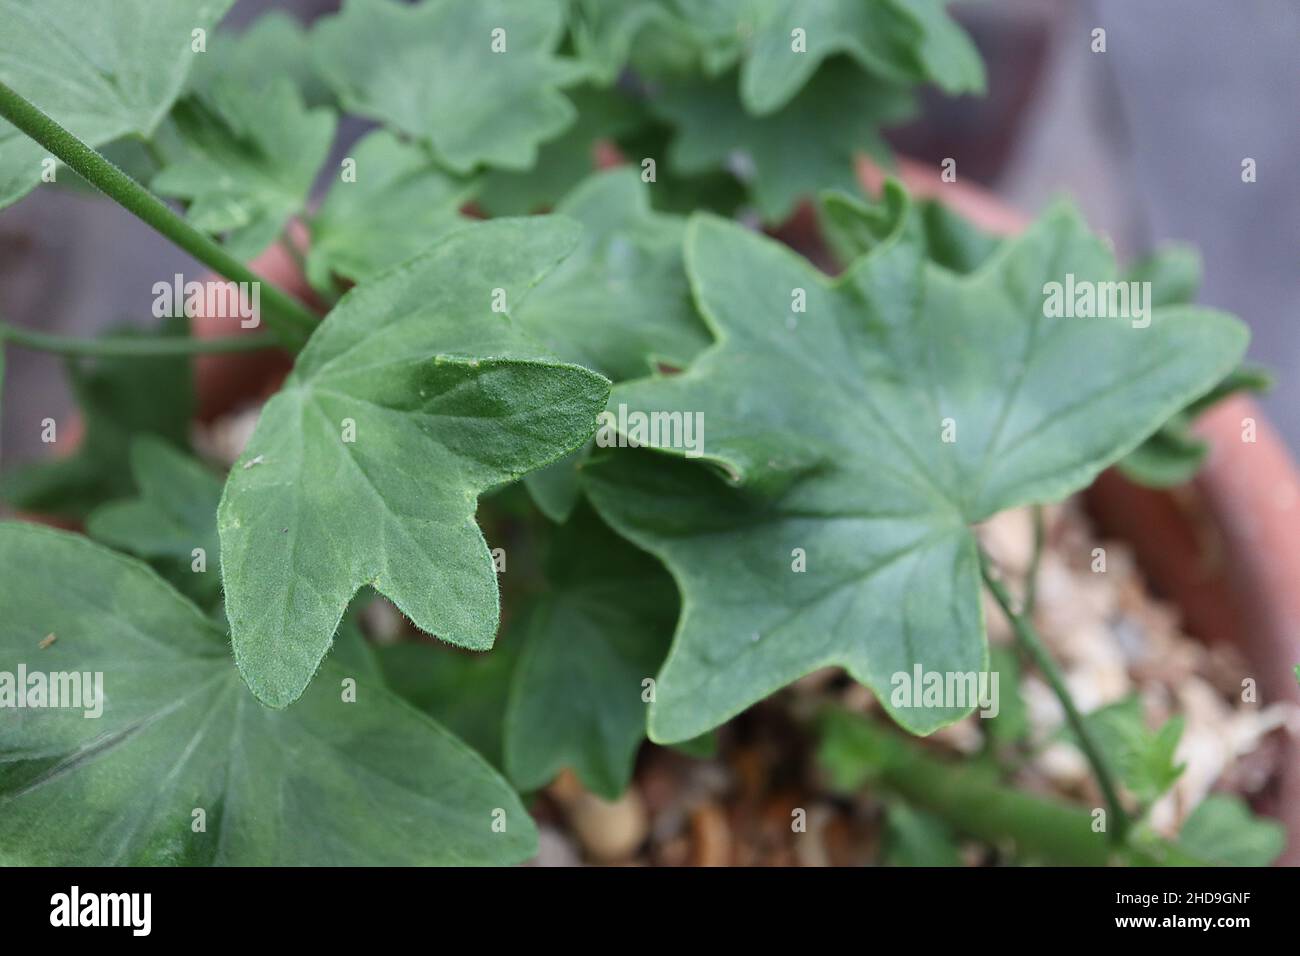 Pelargonium ‘Vectis Glitter’ rounded mid green leaves with rounded lobes,  December, England, UK Stock Photo